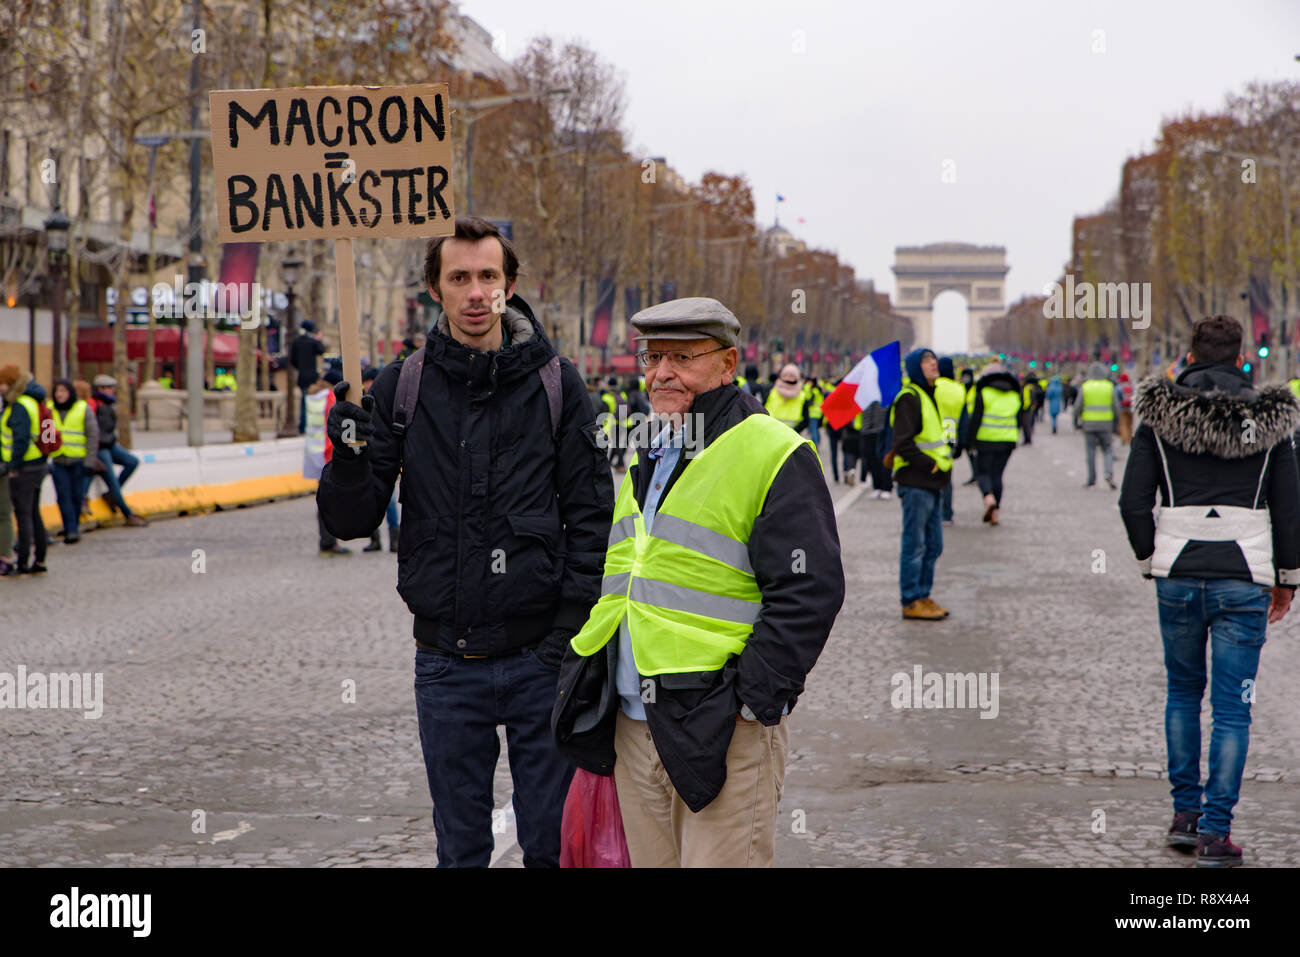 5th Yellow Vests demonstration (Gilets Jaunes) protesters against fuel tax, government, and French President Macron with slogan at Champs-Élysées Stock Photo